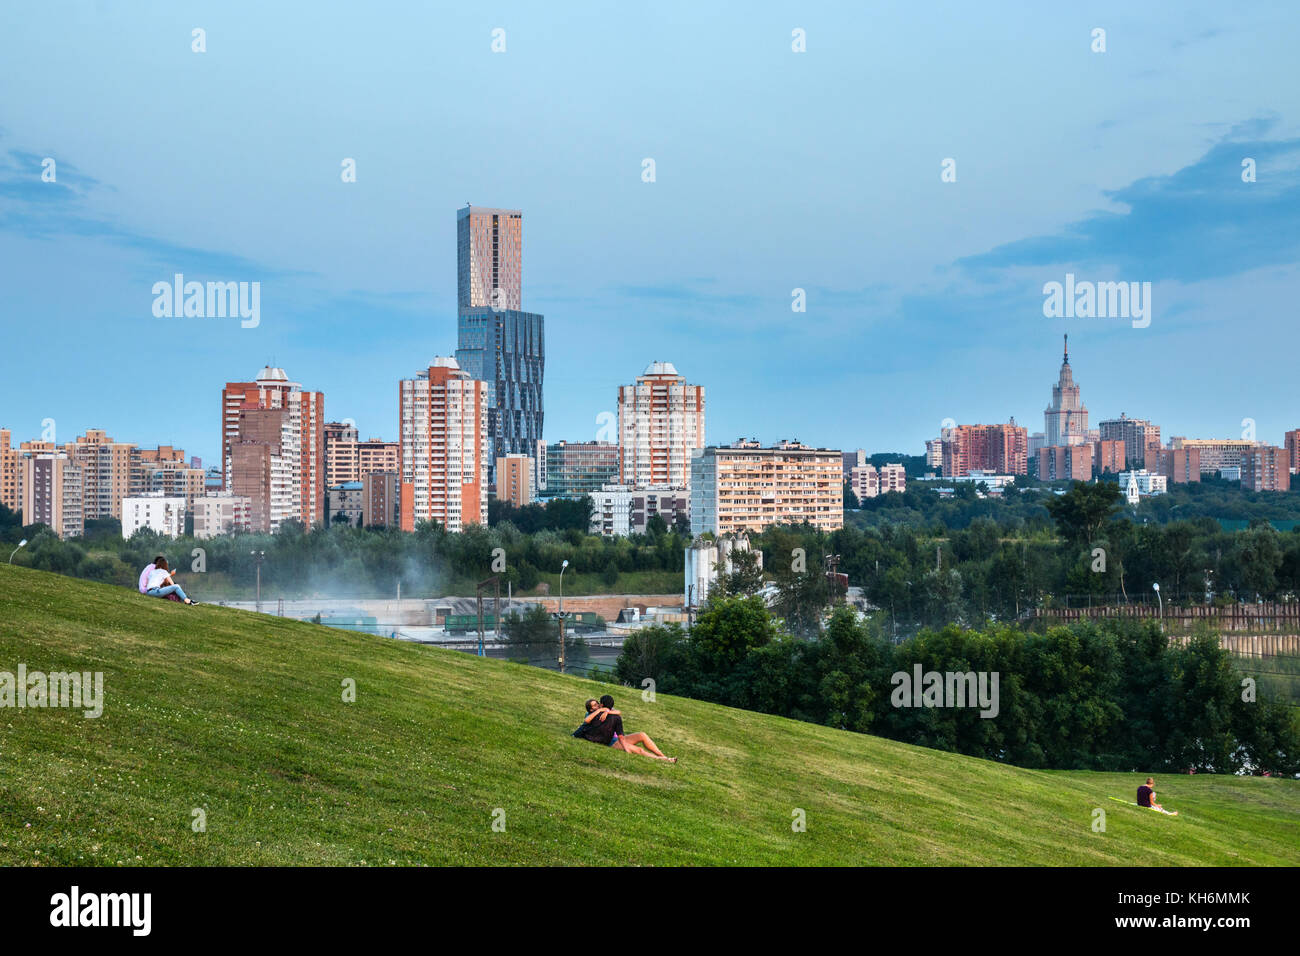 Poklonnaya Hill Victory Park with recreating people against the Moscow city skyline with skyscrapers and apartment buildings during sunset. Russia. Stock Photo